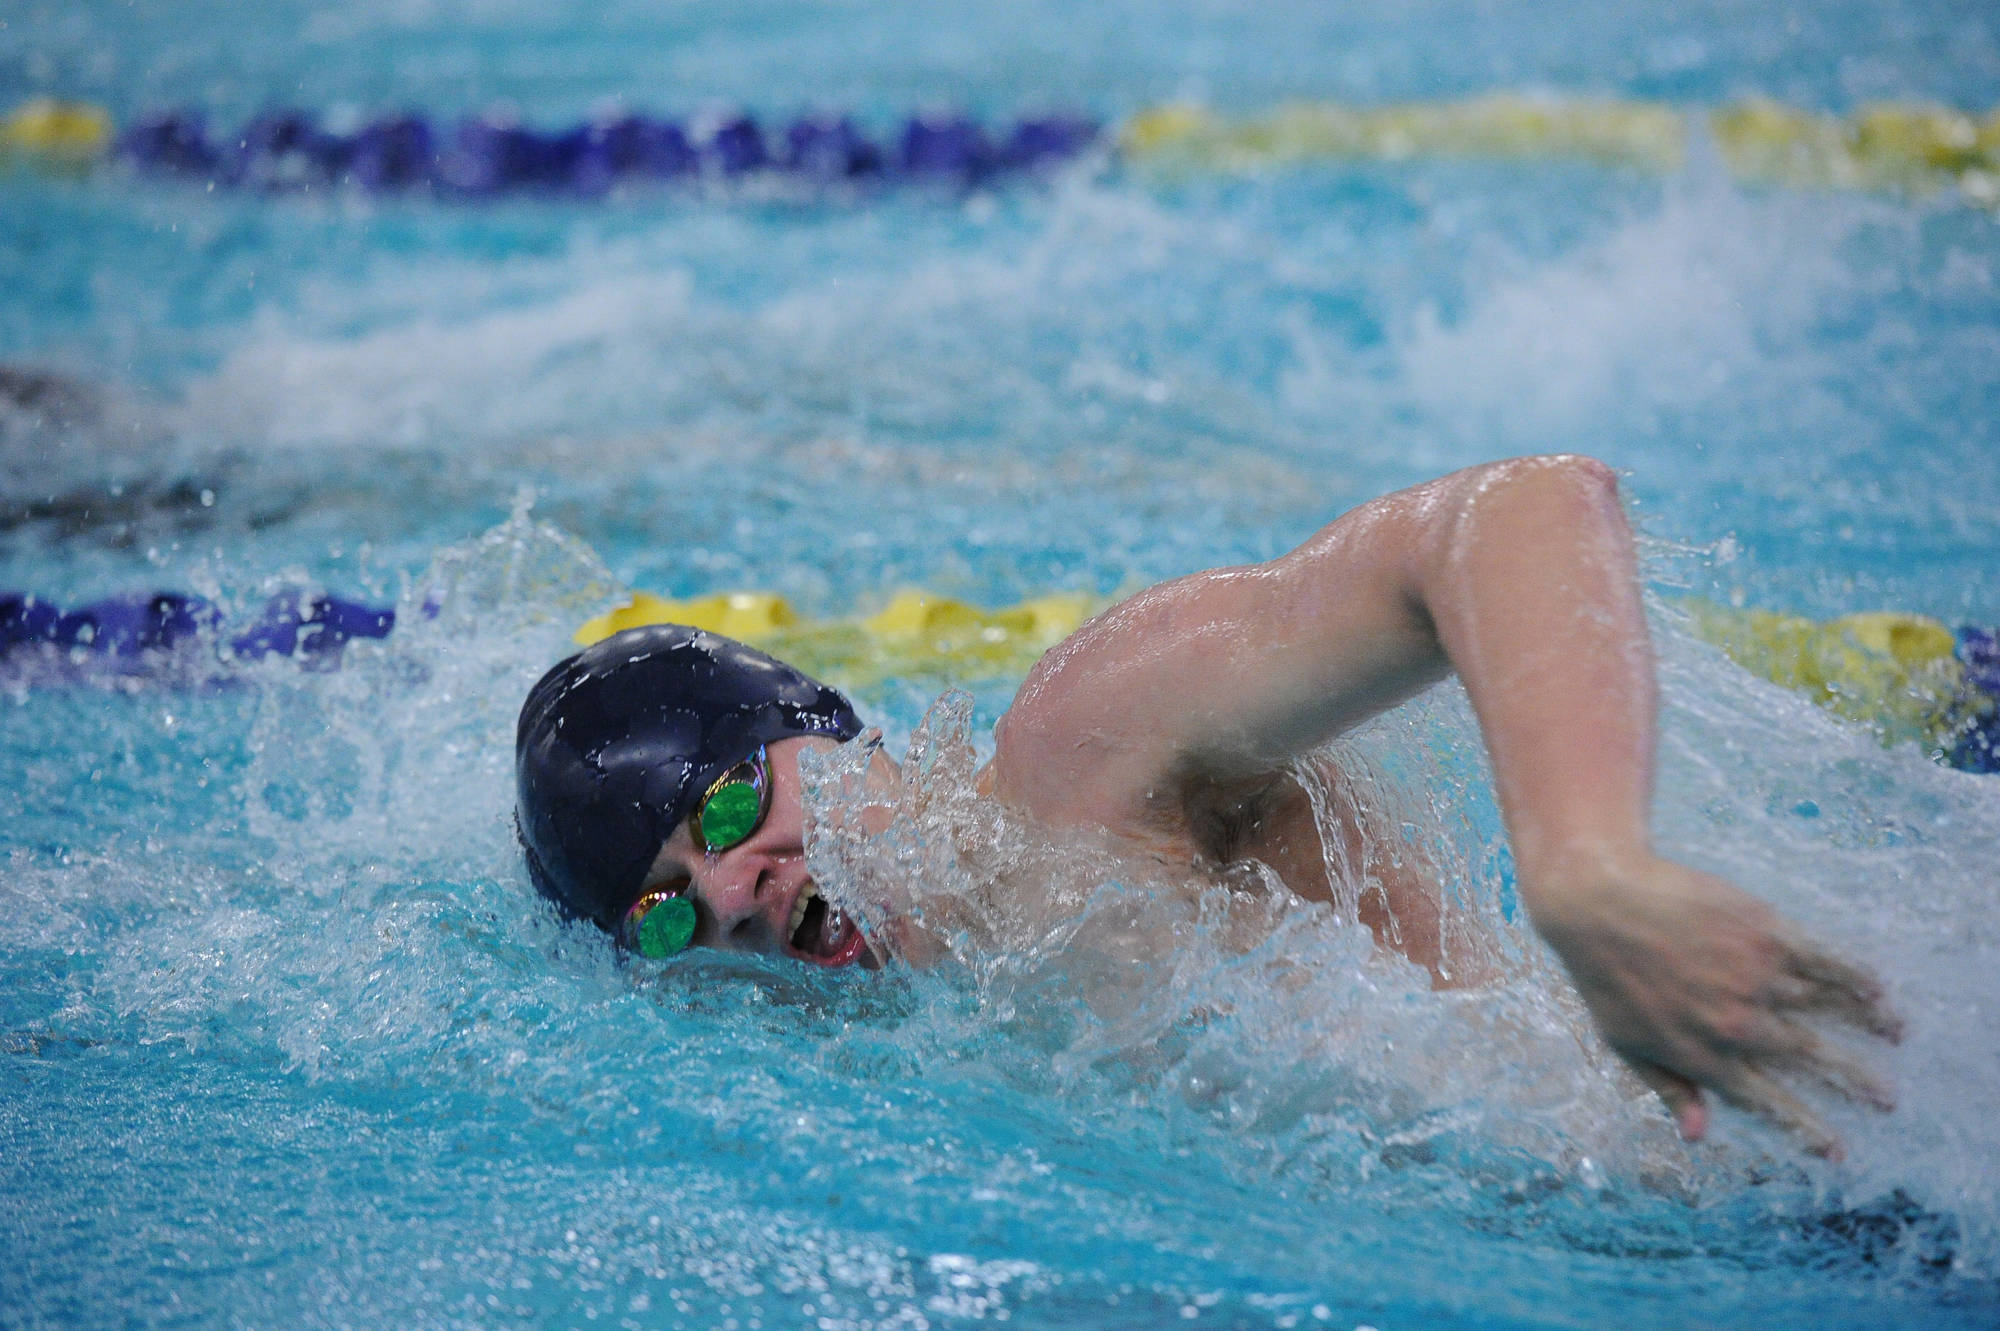 Thunder Mountain High School junior Micah Grigg swms in the 200-yard freestyle final on Saturday at the ASAA/First National Bank Alaska Swim & Dive Championships at Bartlett Pool in Anchorage. Grigg finished in fifth place. (Michael Dinneen | For the Juneau Empire)